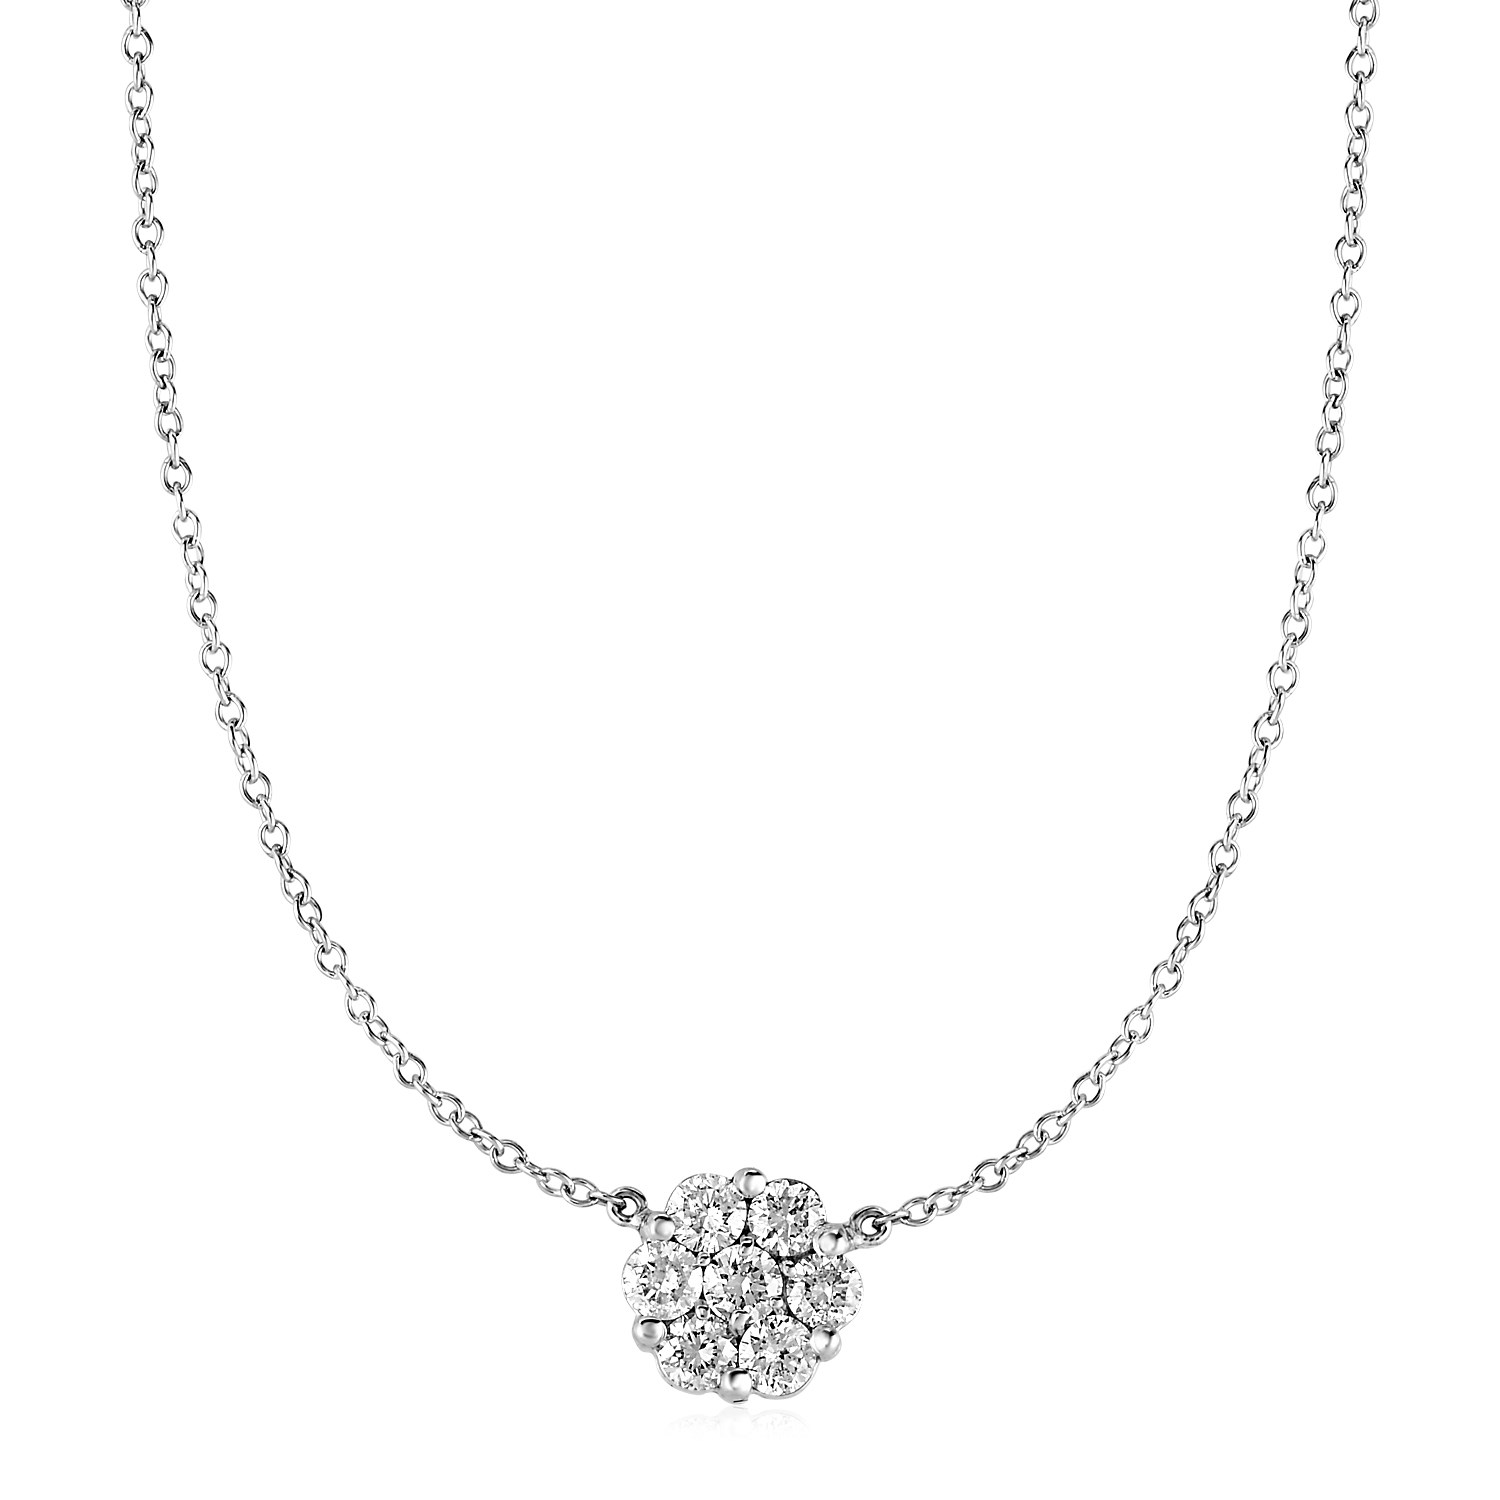 14k White Gold Necklace with Round Pendant with White Diamonds